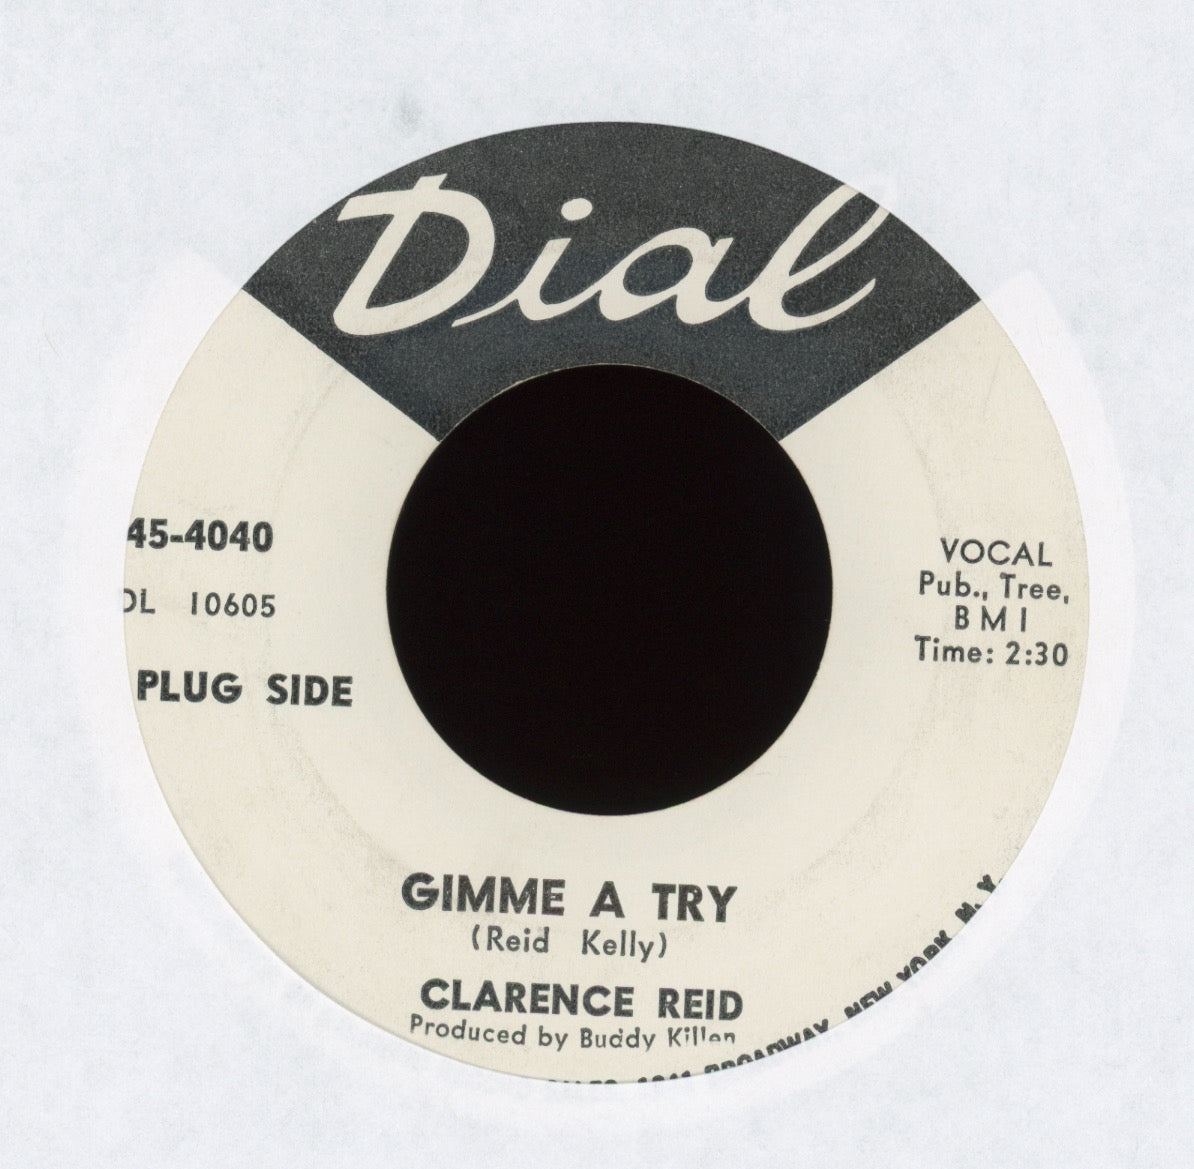 Clarence Reid - Gimme A Try on Dial Promo Soul Funk 45